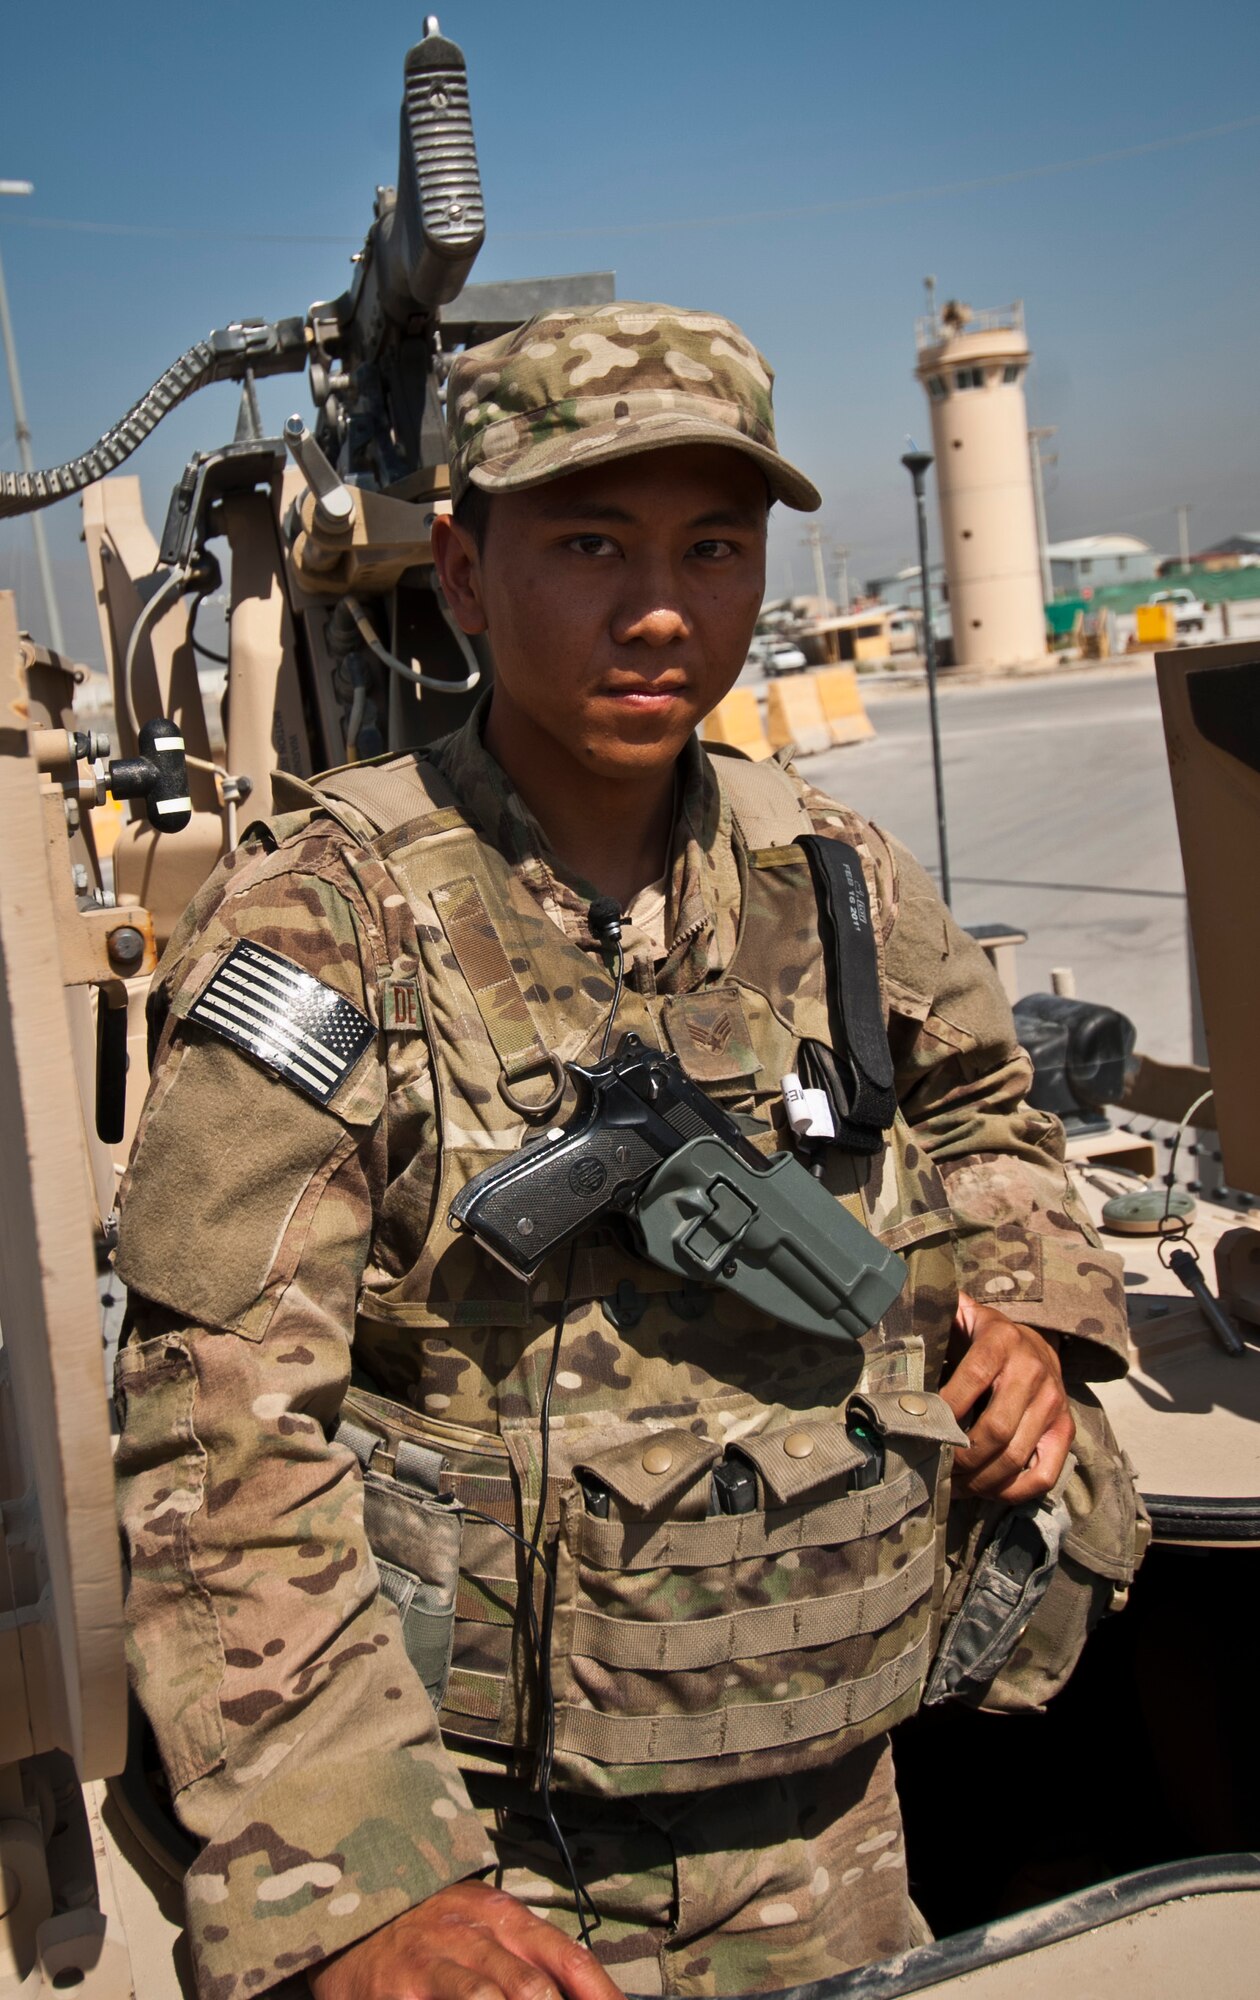 SrA Arsenio De la Cruz, a gunner with the 455th Expeditionary Security Forces Squadron, poses for a photo in front of a Crew Operated Weapons System before a mission at Bagram Airfield Afghanistan, Aug. 18, 2012. The CROW system allows De la Cruz to engagement threats from within the safety of his Mine Resistant Ambush Protected-All Terrain Vehicle. (U.S. Air Force Photo/Capt. Raymond Geoffroy)